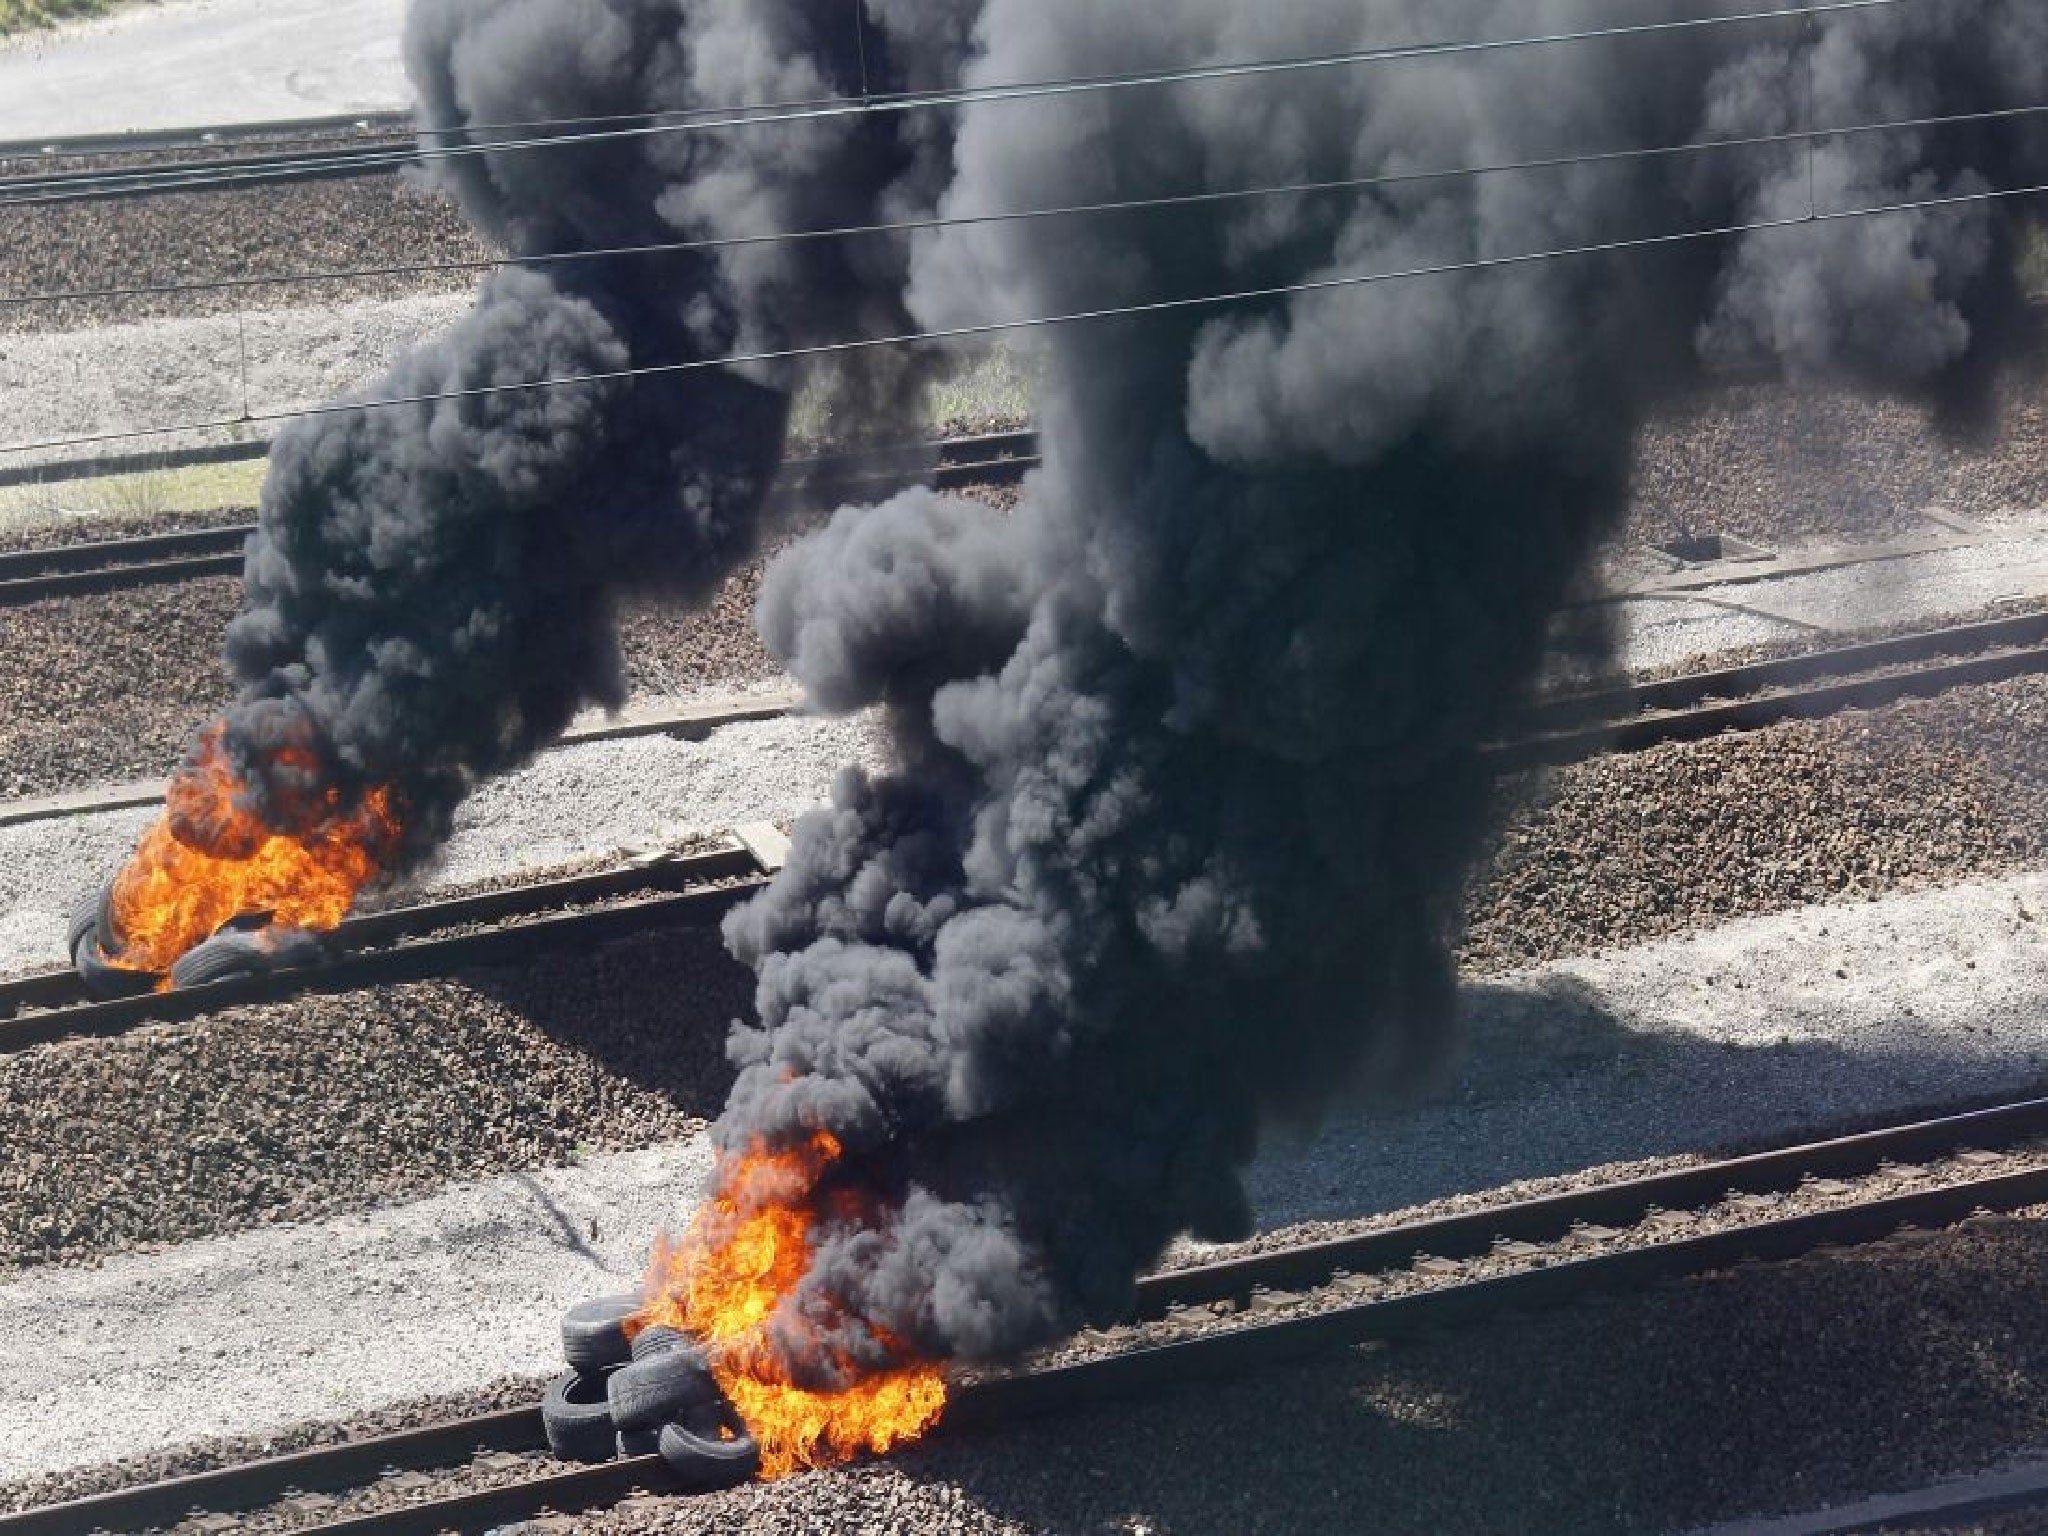 Striking workers invade the Eurotunnel train tracks in Calais, northern France, and burn tires in a protest against job cuts, Tuesday, June 30, 2015. About 100 striking French ferry workers have blocked train traffic between France and England for a seco